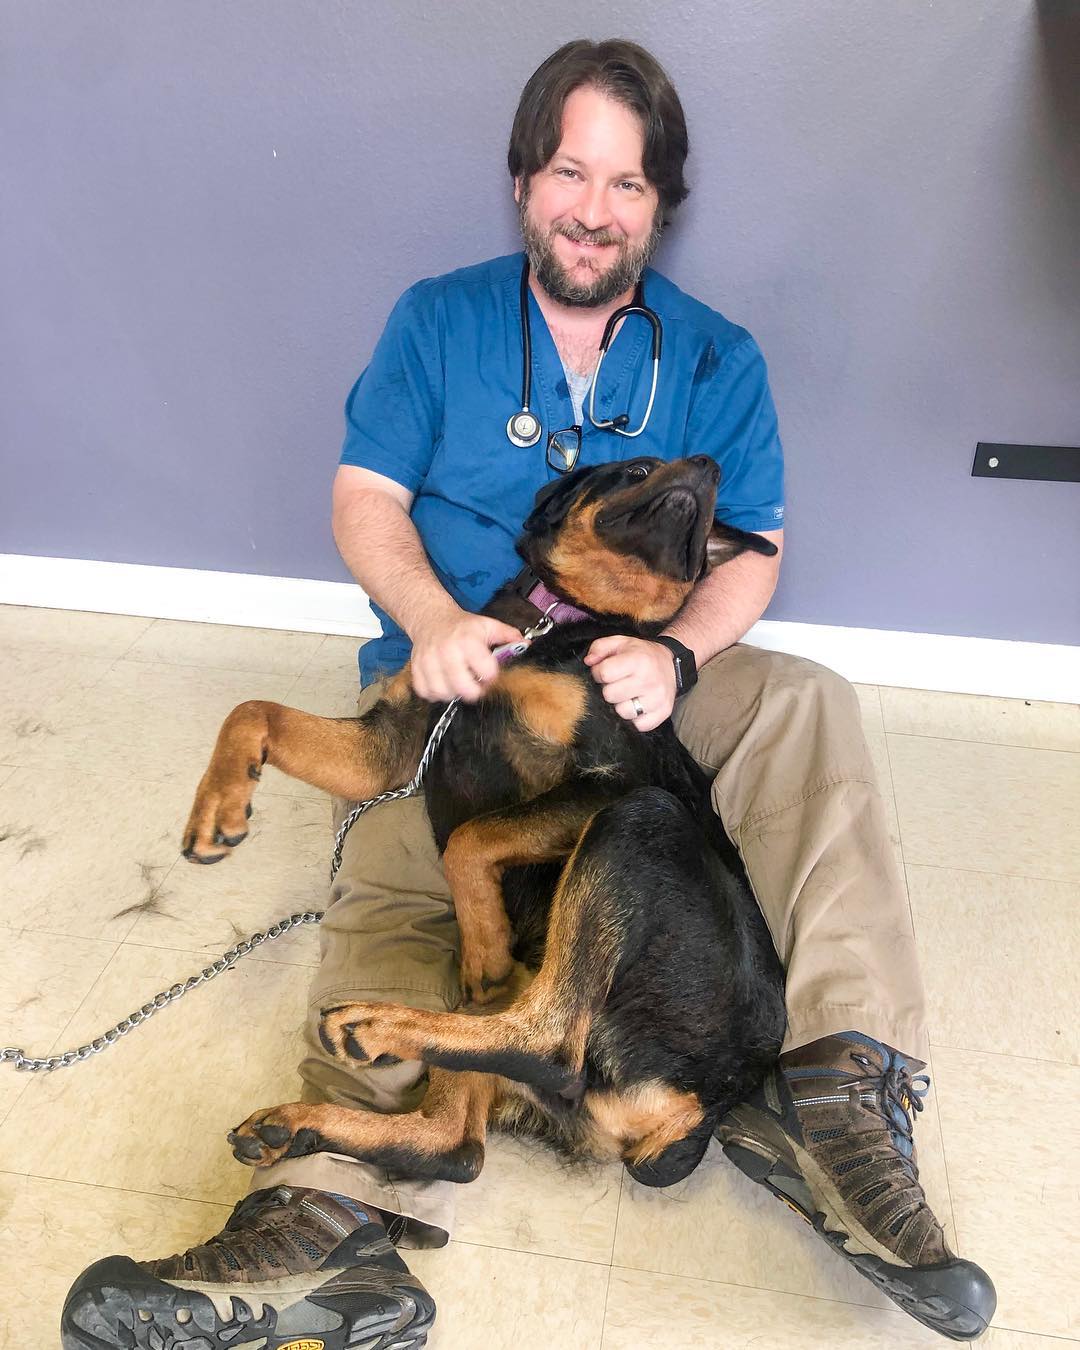 Vet siting on the floor petting a Rottweiler lying in between his legs